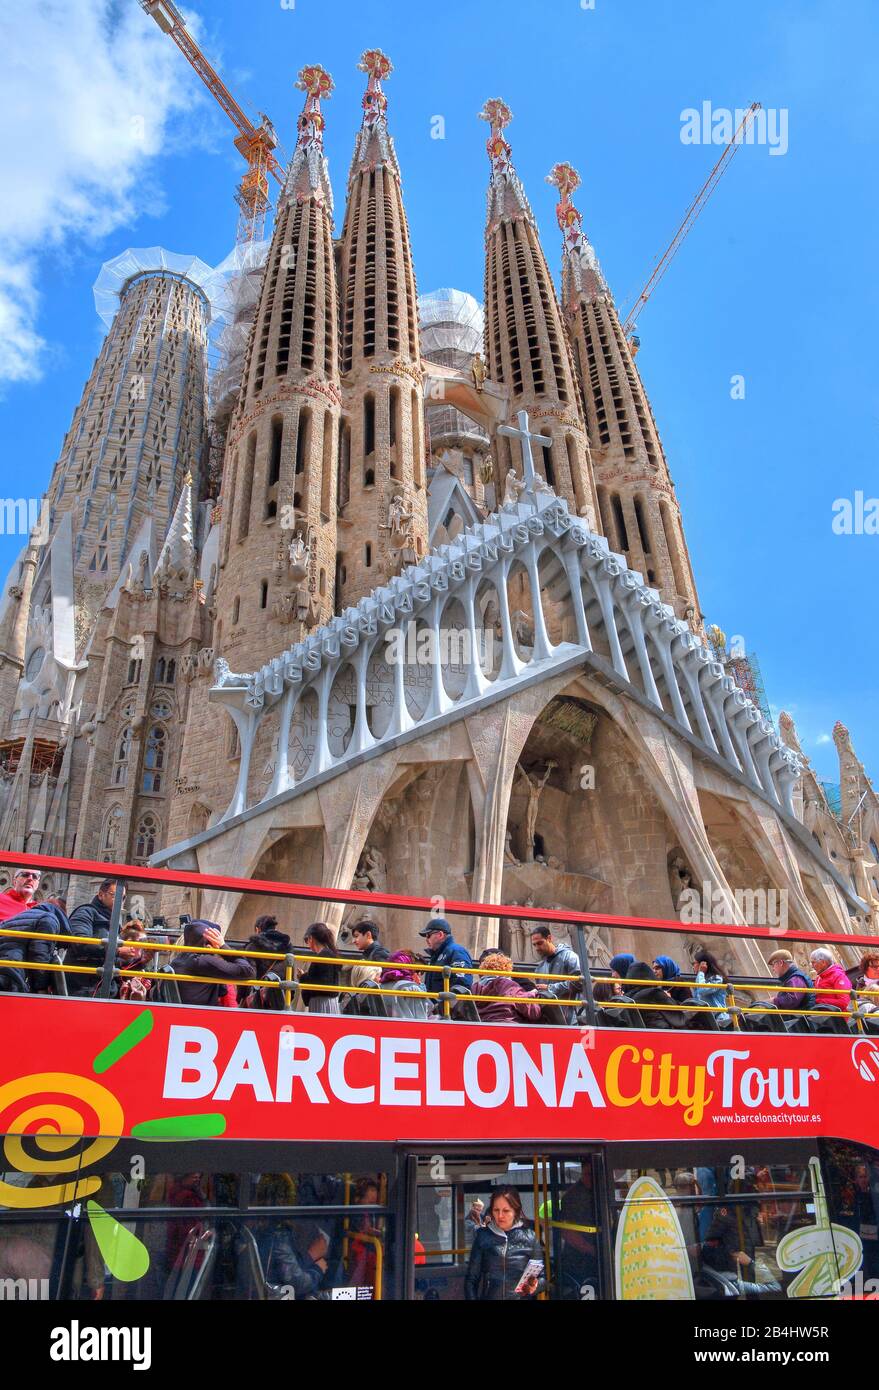 City tour bus with the Sagrada Familia cathedral by Antoni Gaudi in Barcelona, Catalonia, Spain Stock Photo